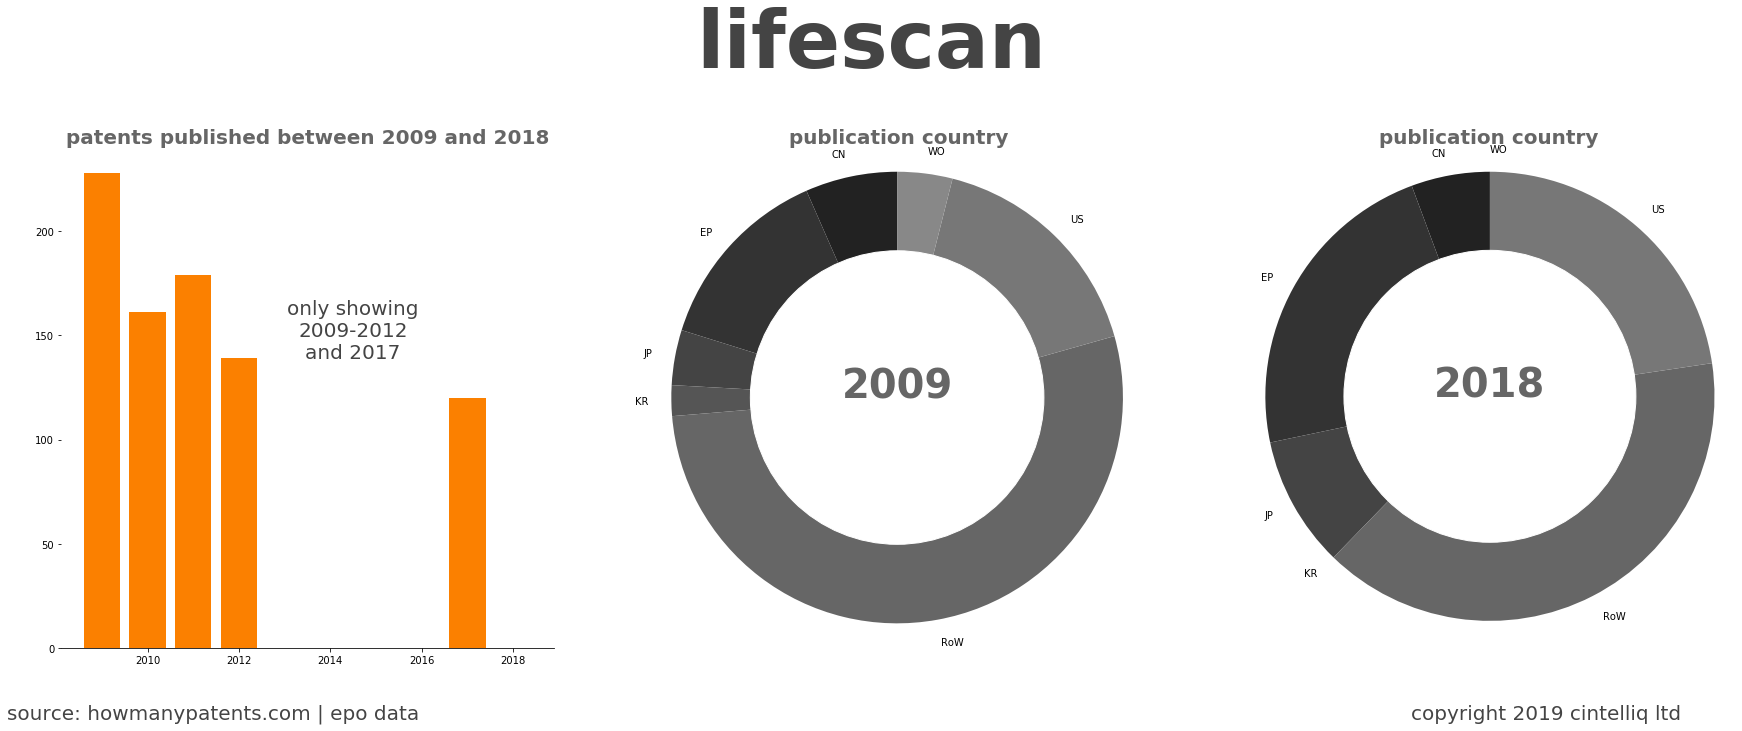 summary of patents for Lifescan